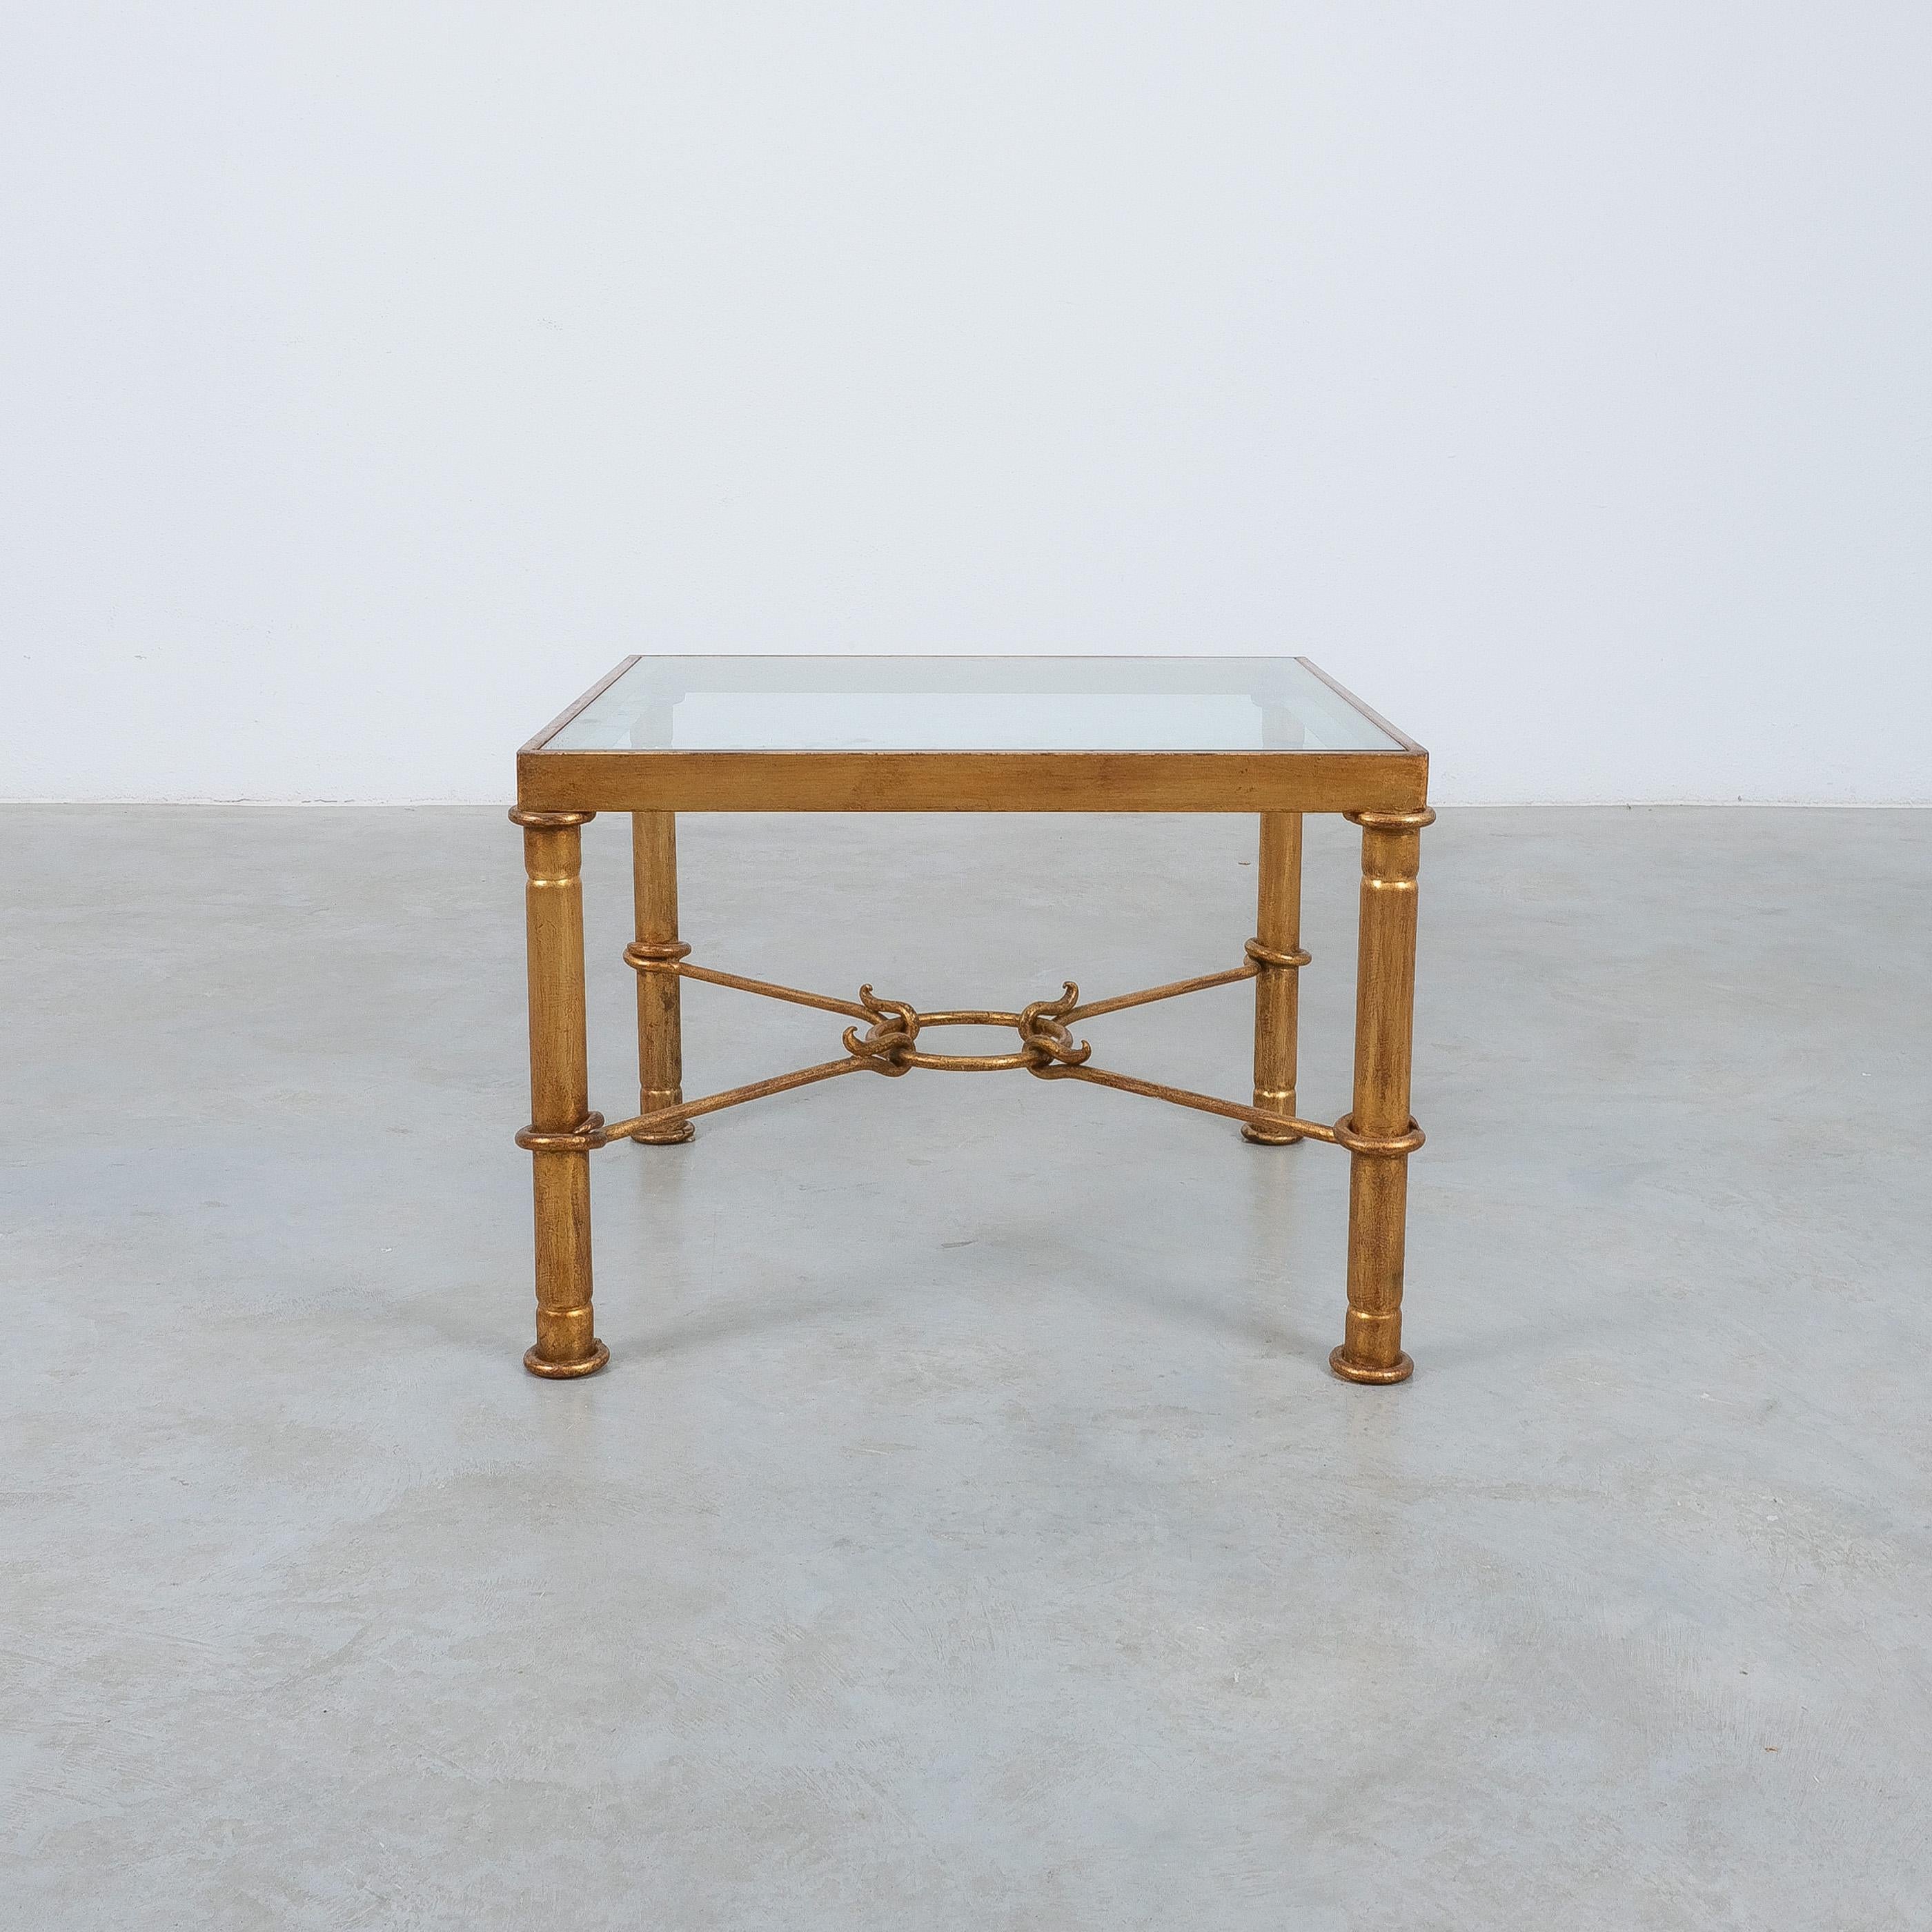 Hermes Gilt Iron Coffee Table by Giovanni Banci, Italy, Midcentury For Sale 2